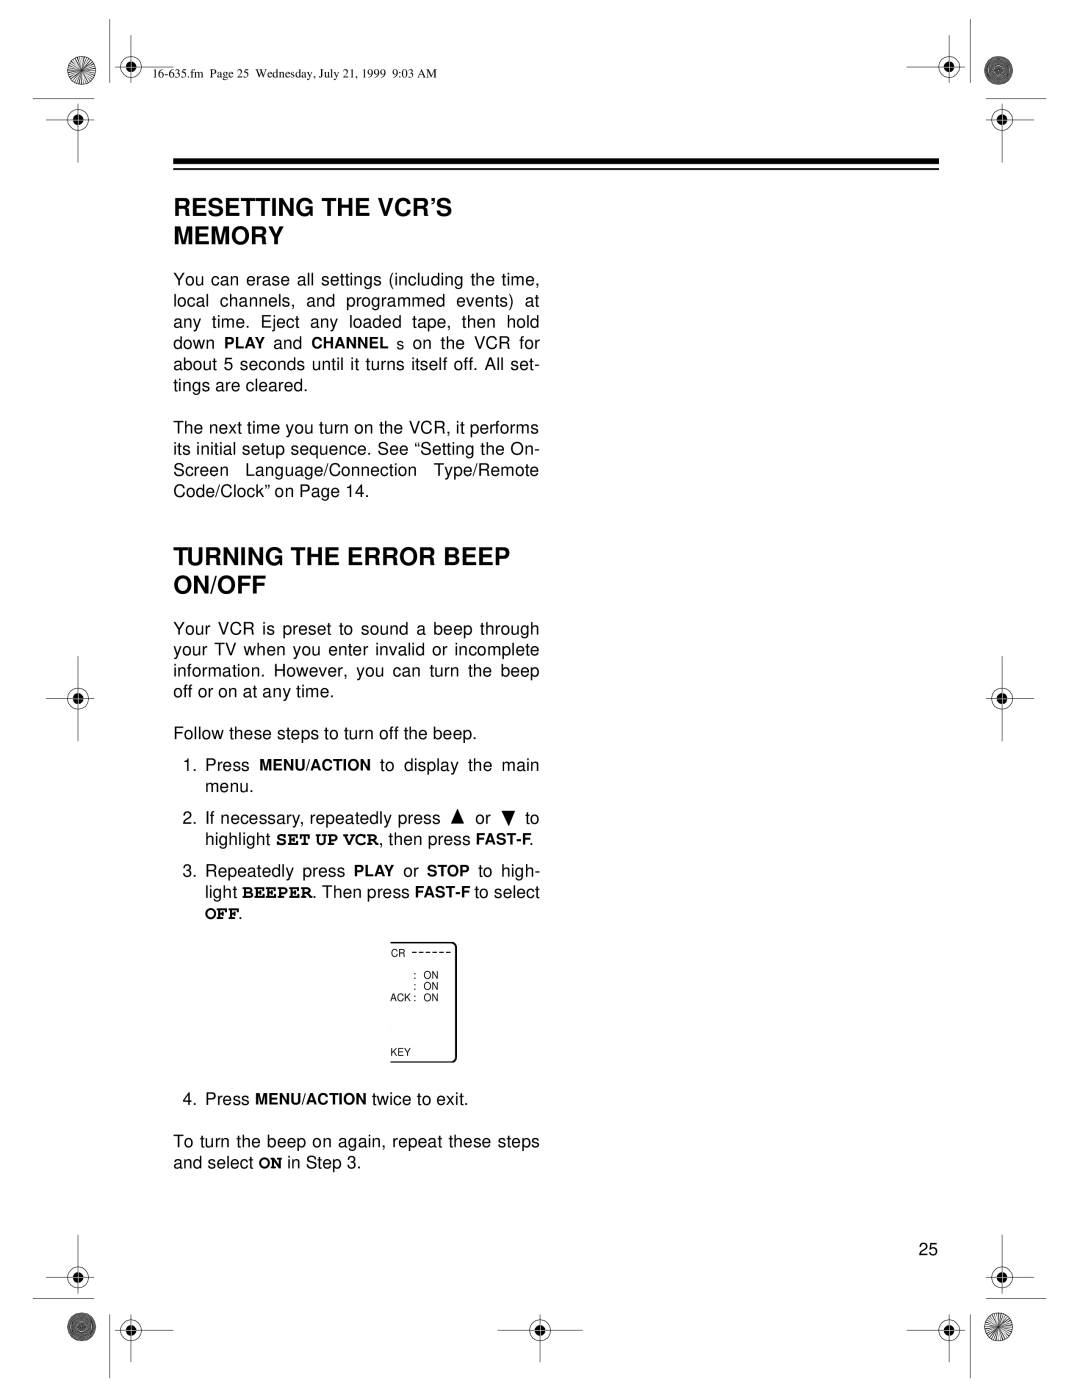 Radio Shack 66 owner manual Resetting The Vcr’S Memory, Turning The Error Beep On/Off 